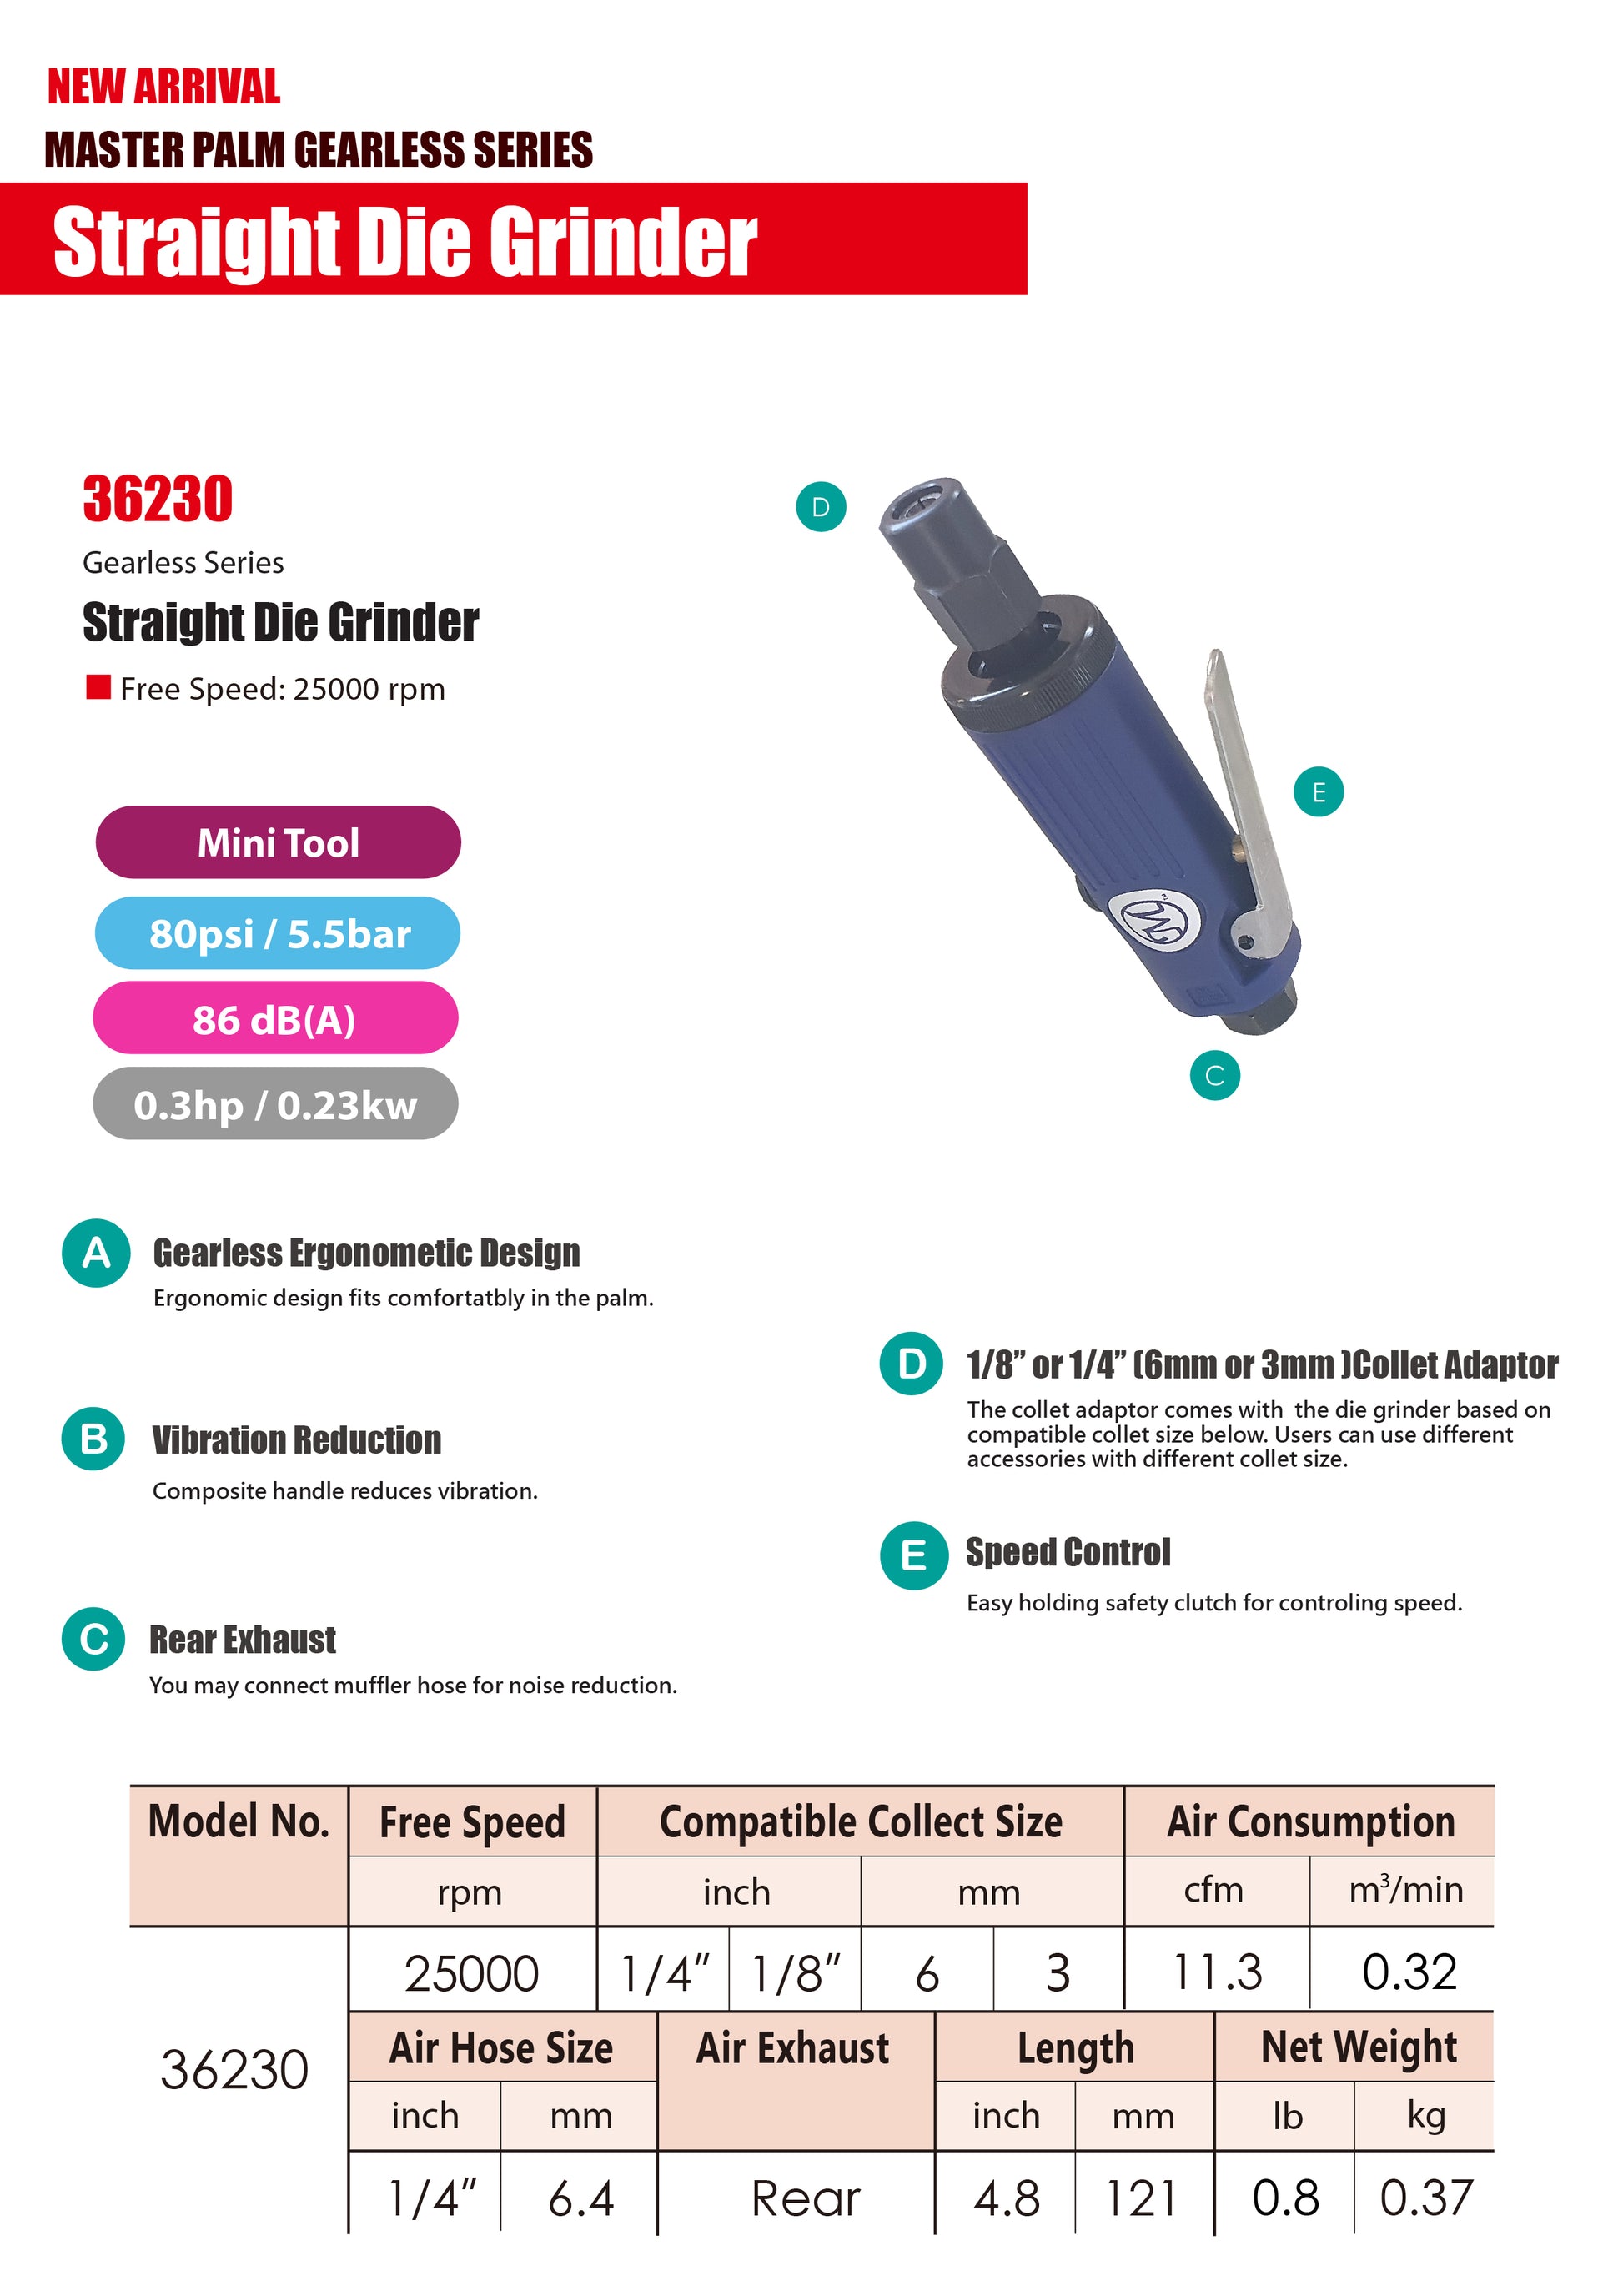 Mini Composite Gearless Straight Air Die Grinder with 1/4 and 1/8 inch collets, 25000RPM - 36230 - USD $150 - Master Palm Pneumatic